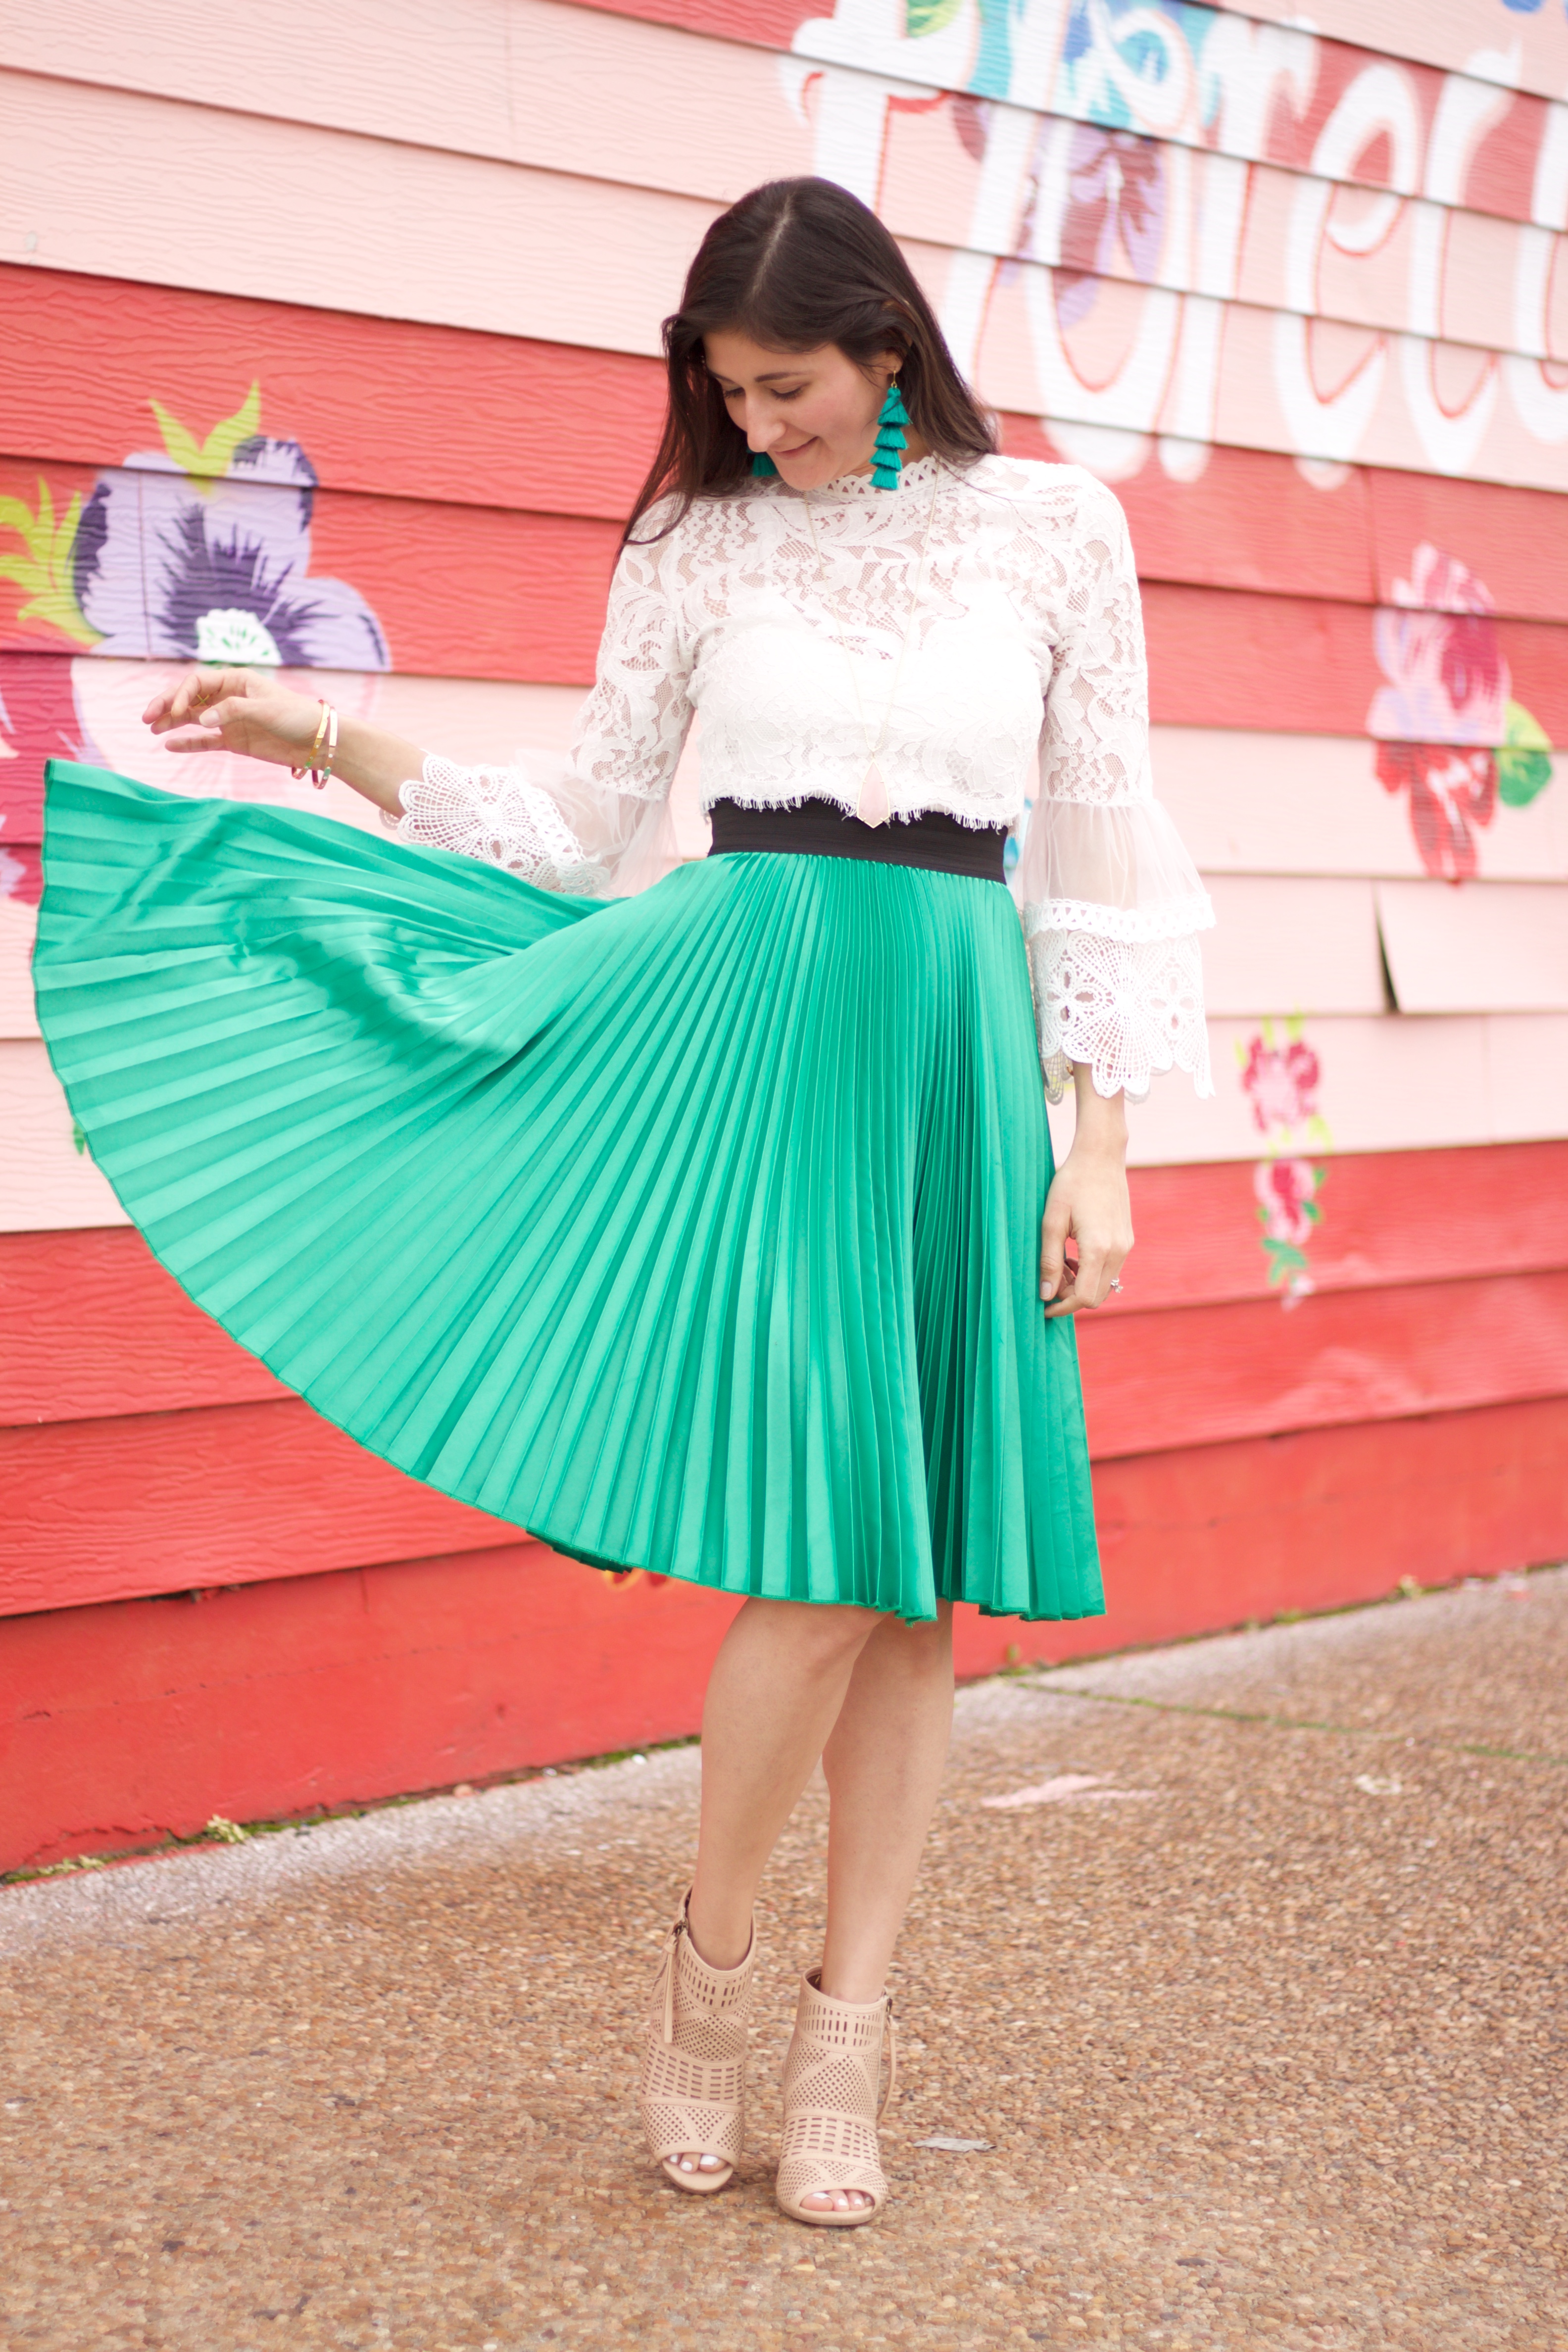 Pleated skirt for spring time worn by fashion blogger Jenni Metz